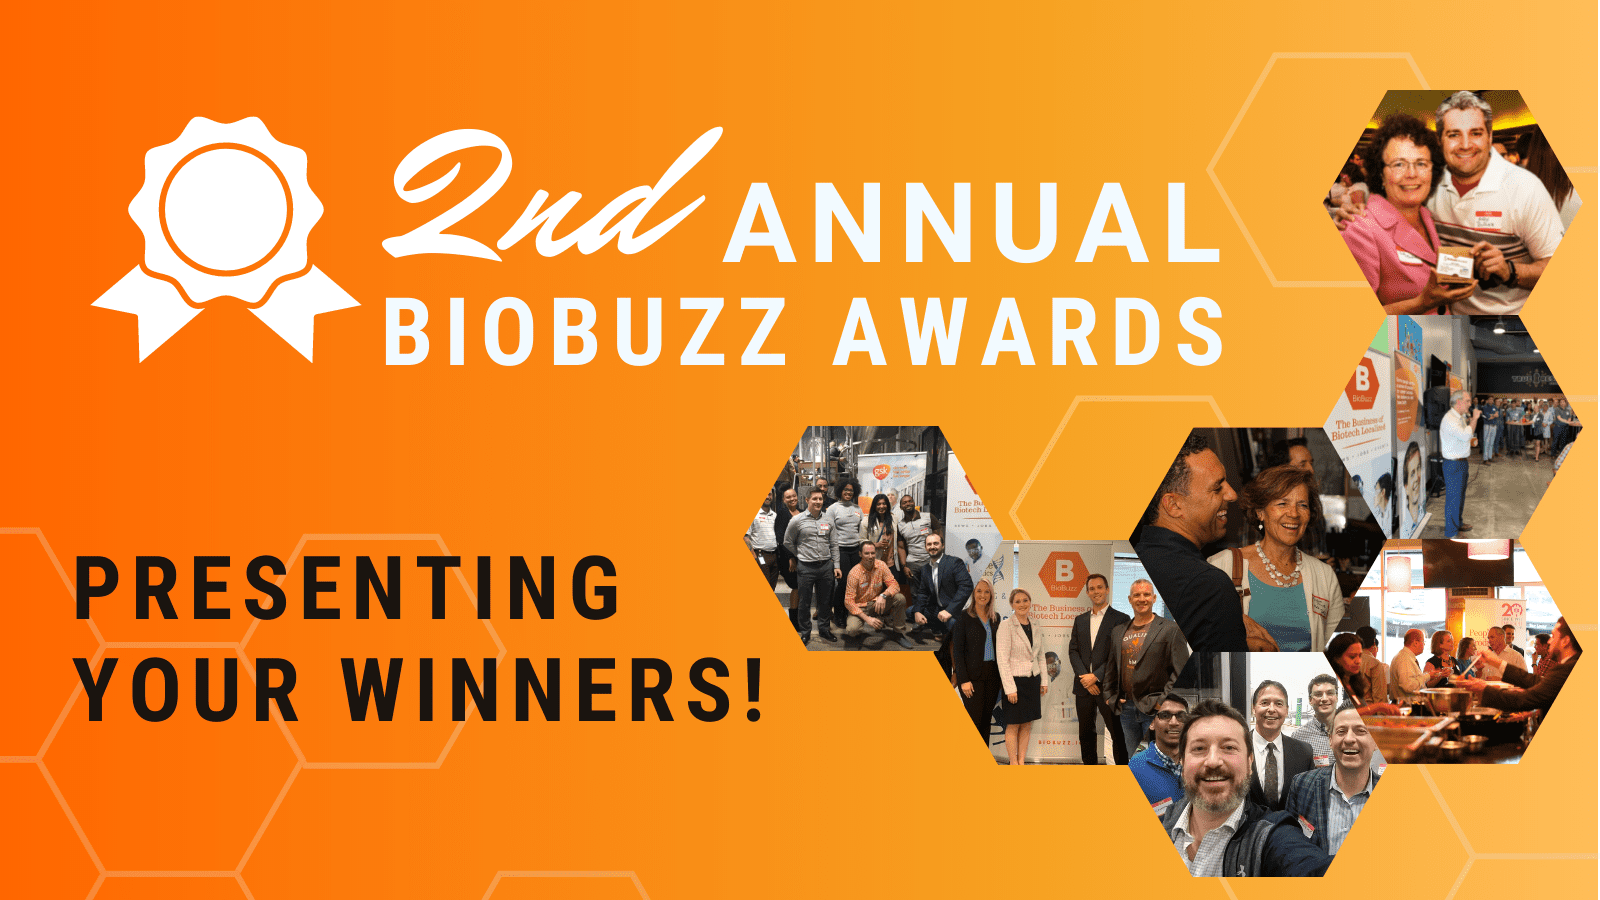 Orange banner with photos of people, with text saying "2nd Annual BioBuzz Awards - Presenting Your Winners"